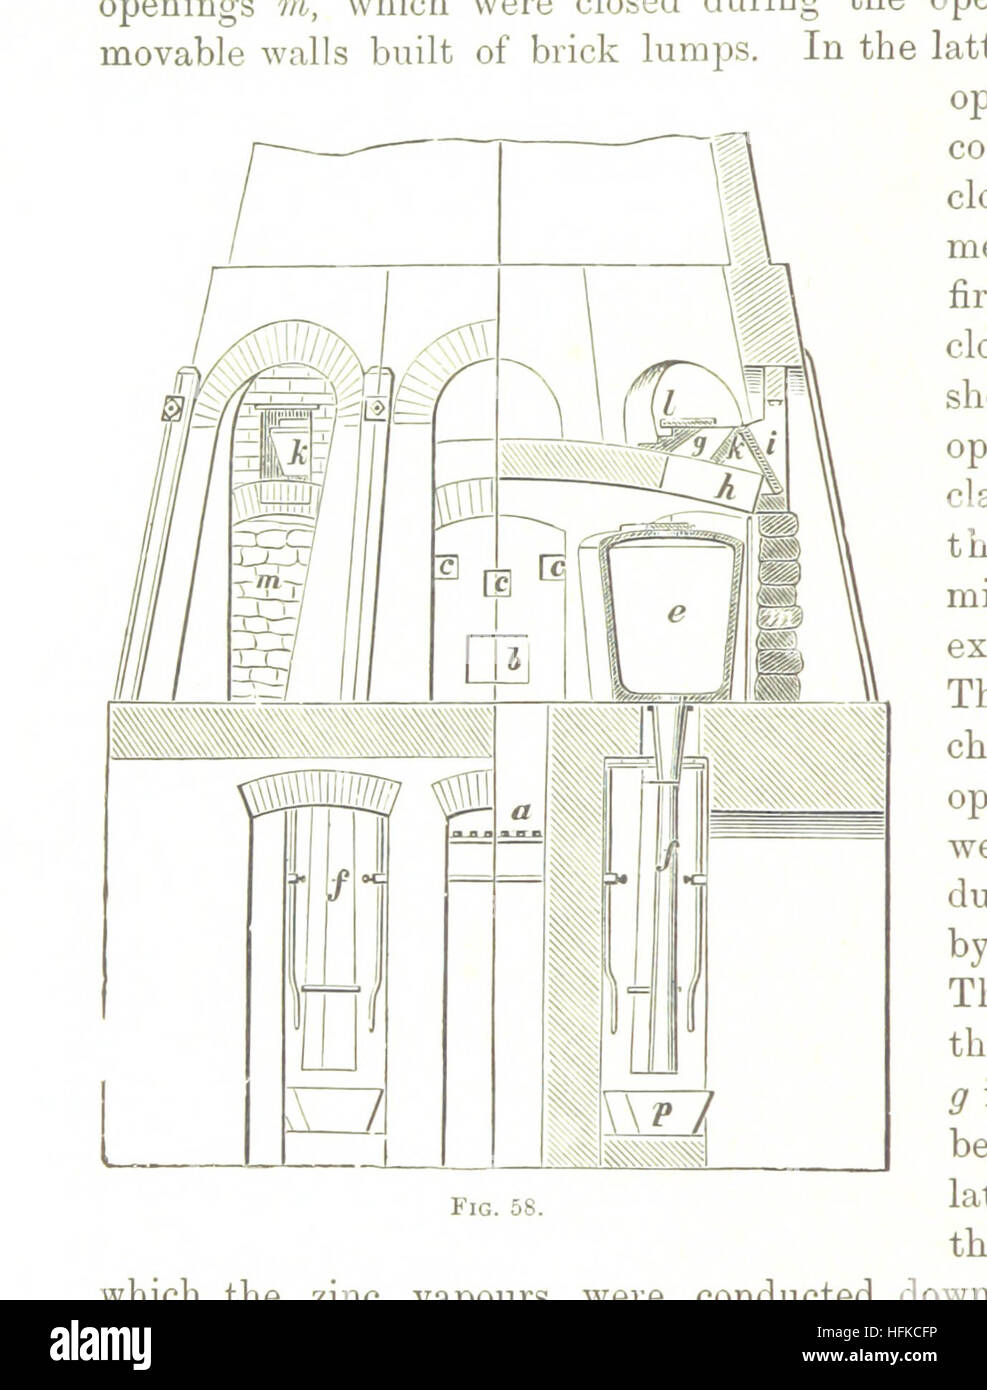 Image taken from page 120 of 'Handbook of Metallurgy ... Translated by H. Louis' Image taken from page 120 of 'Handbook of Metallurgy Stock Photo